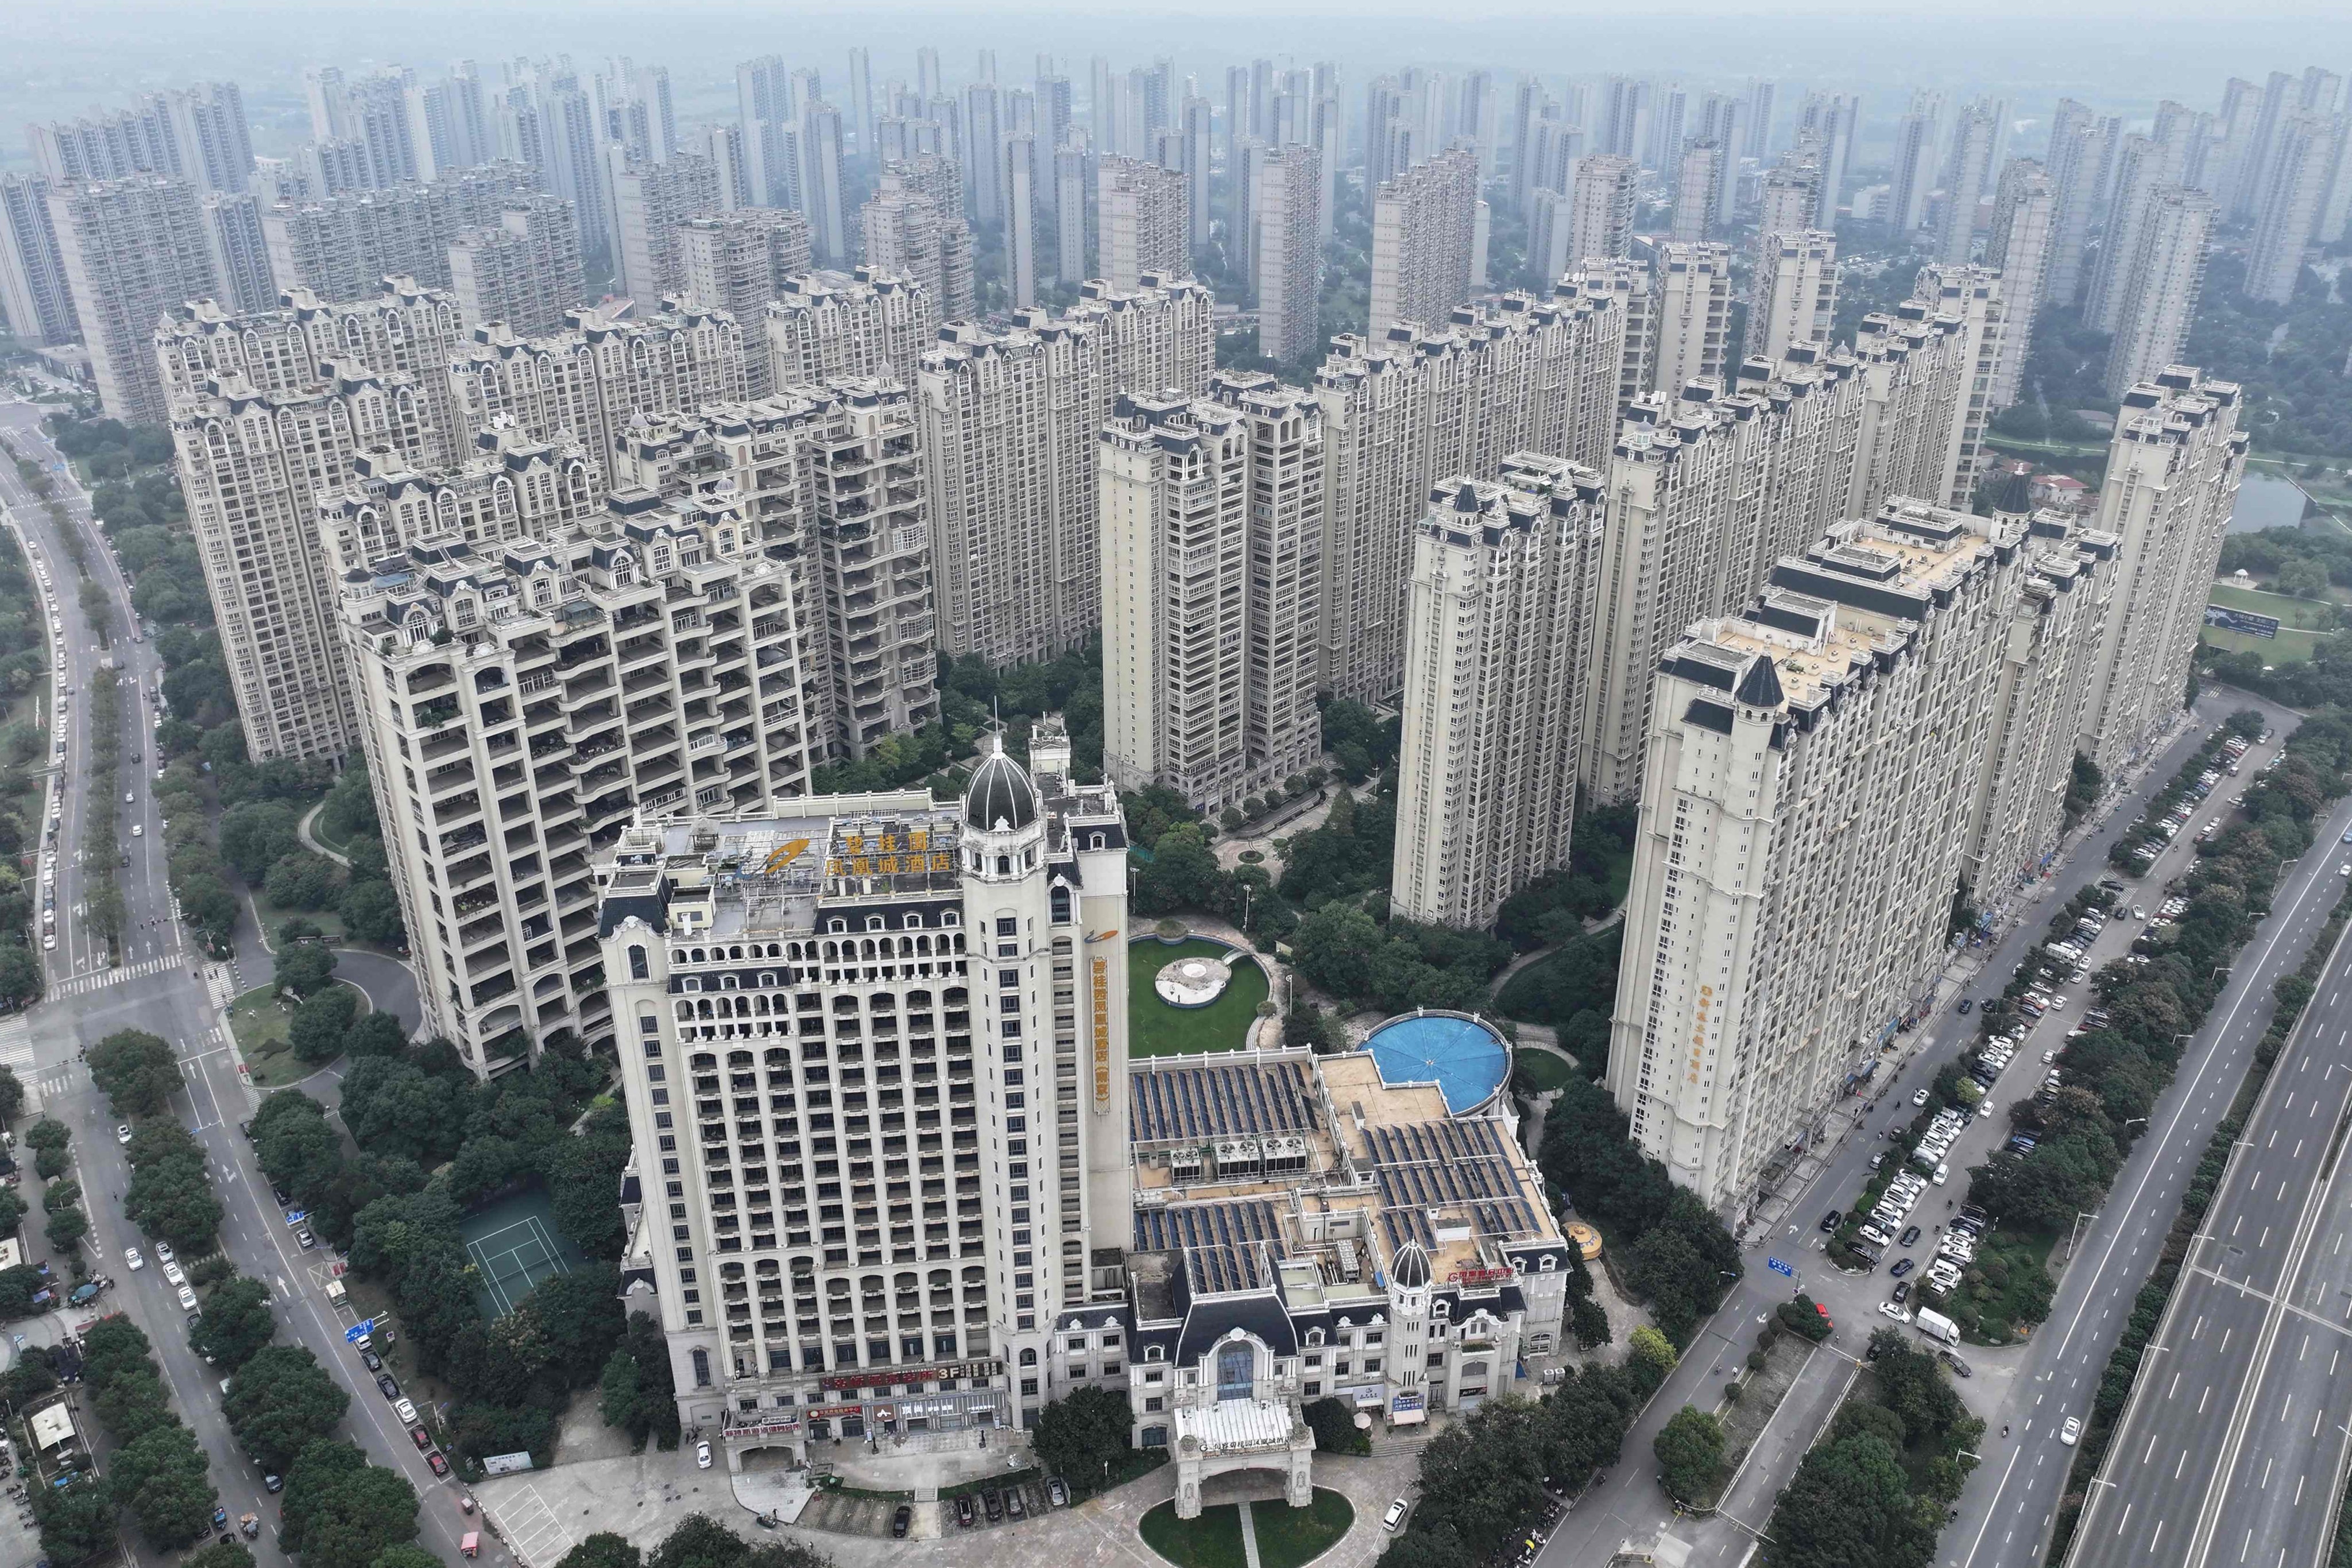 Apartment blocks built by Chinese developer Country Garden are seen in Zhenjiang, Jiangsu province, on October 10. Shares in the heavily indebted company have risen recently on signs that officials are planning more support for the troubled sector. Photo: AFP